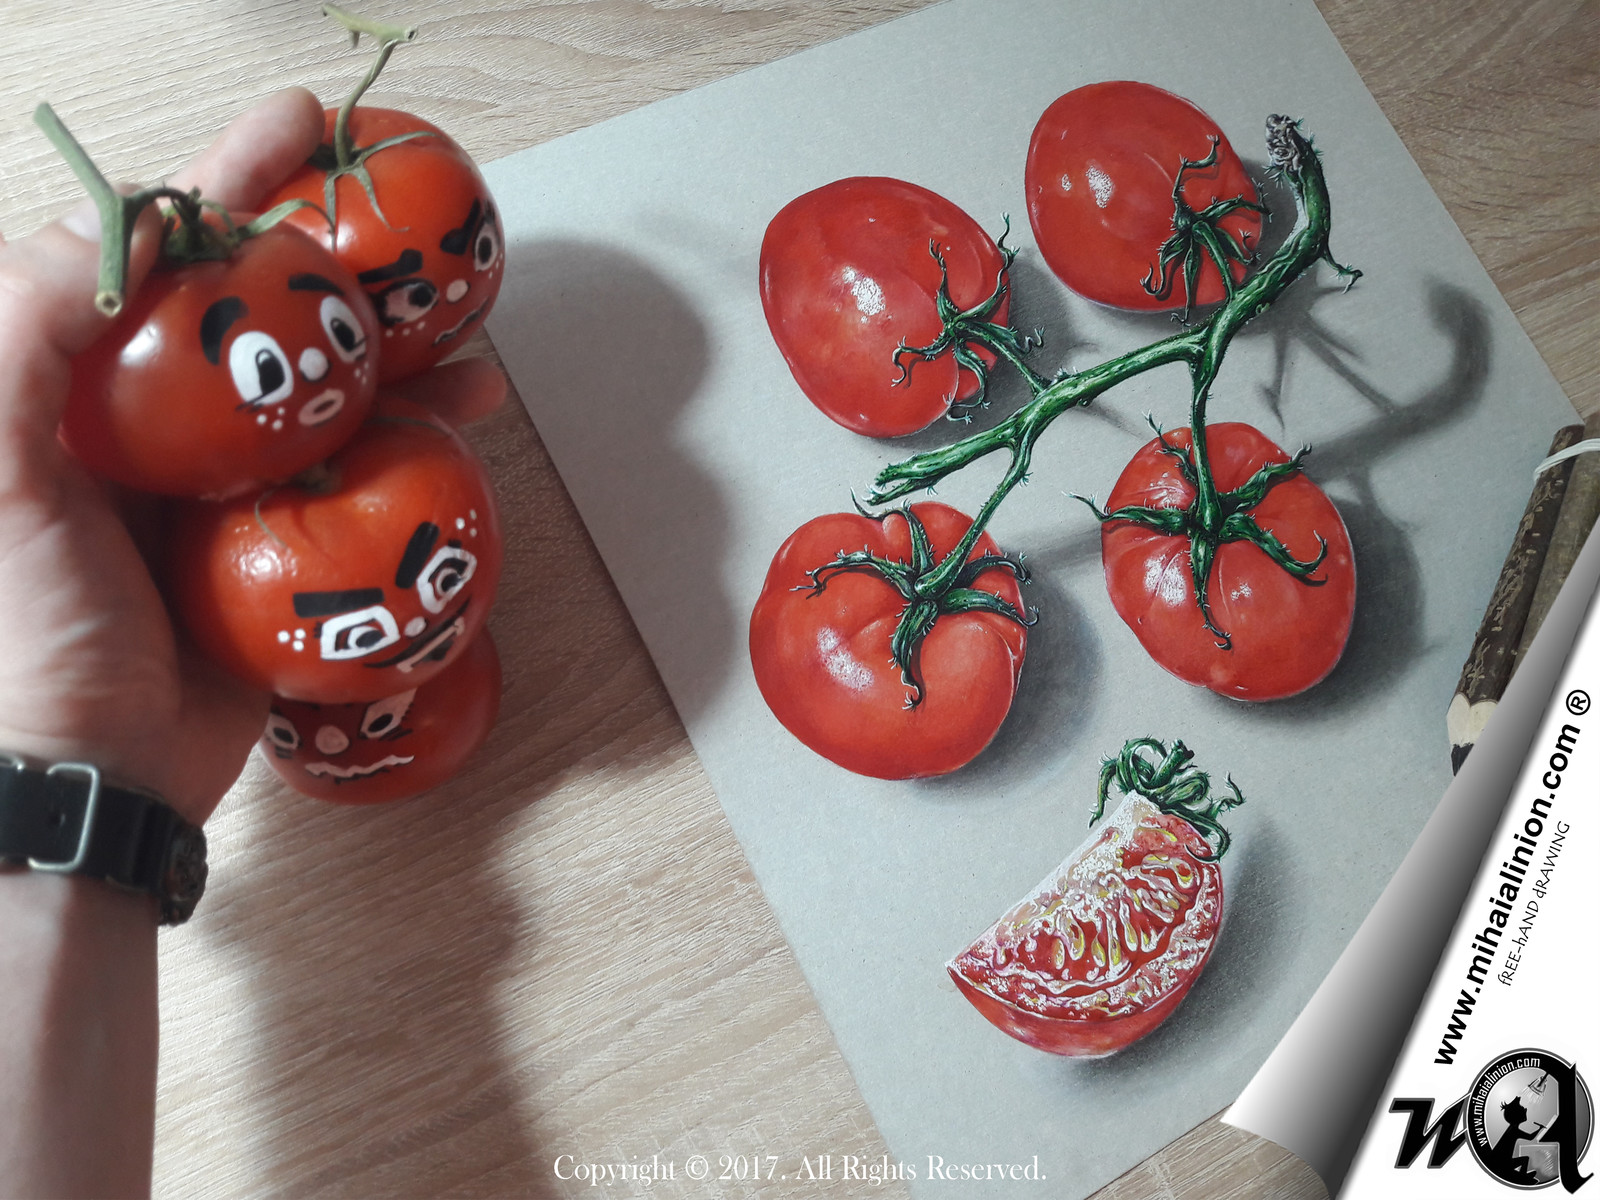 Drawing Tomatoes - Realistic 3D Art